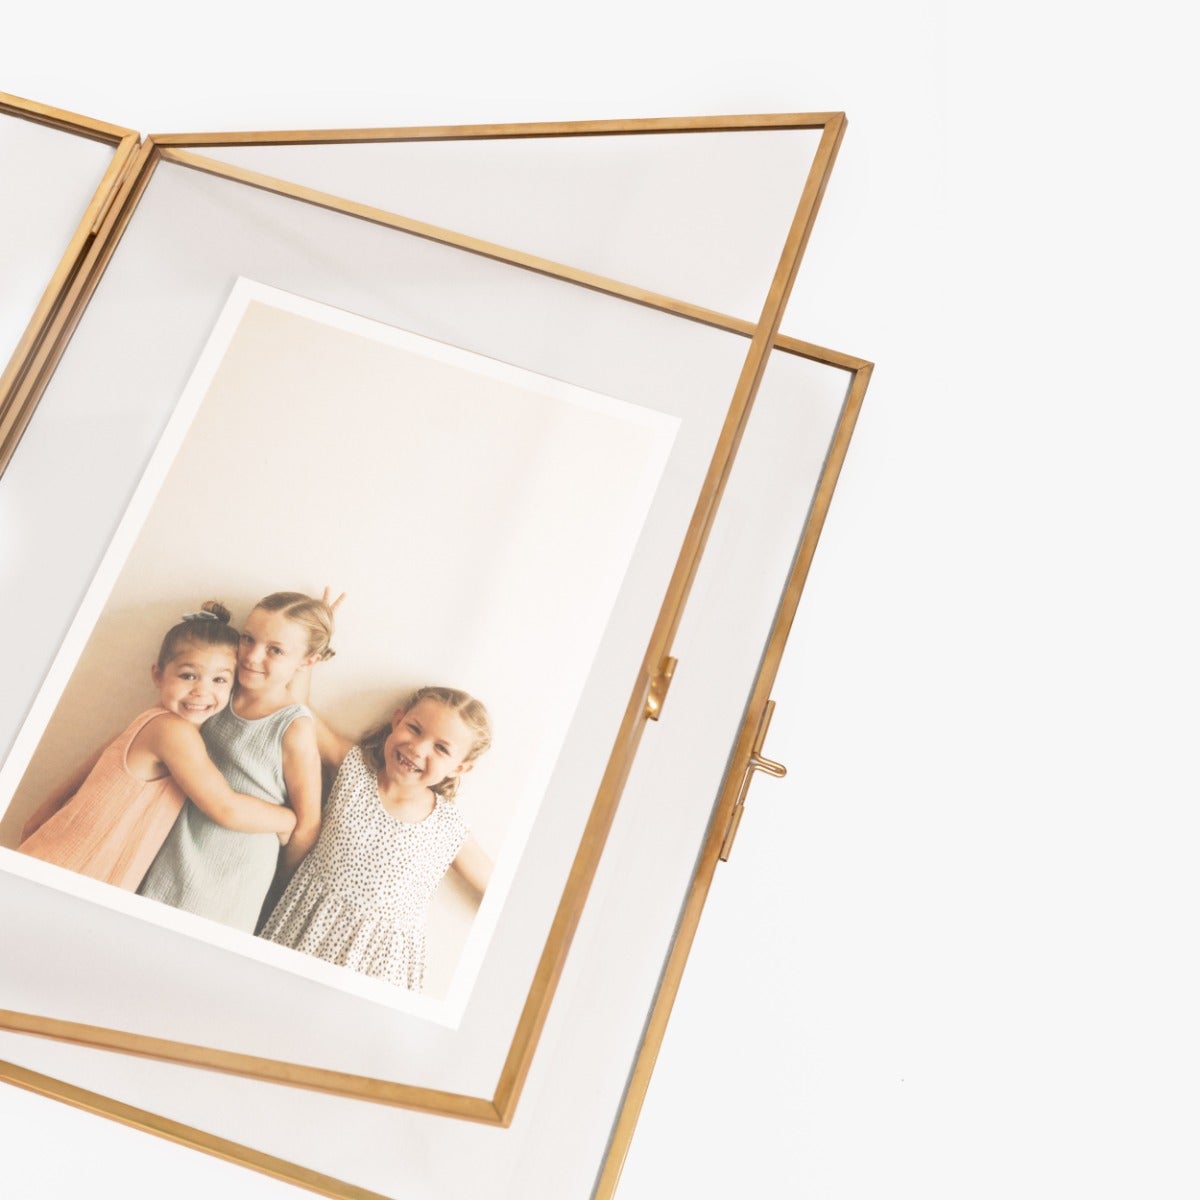 Pressed Glass Frame for Photos & Flowers